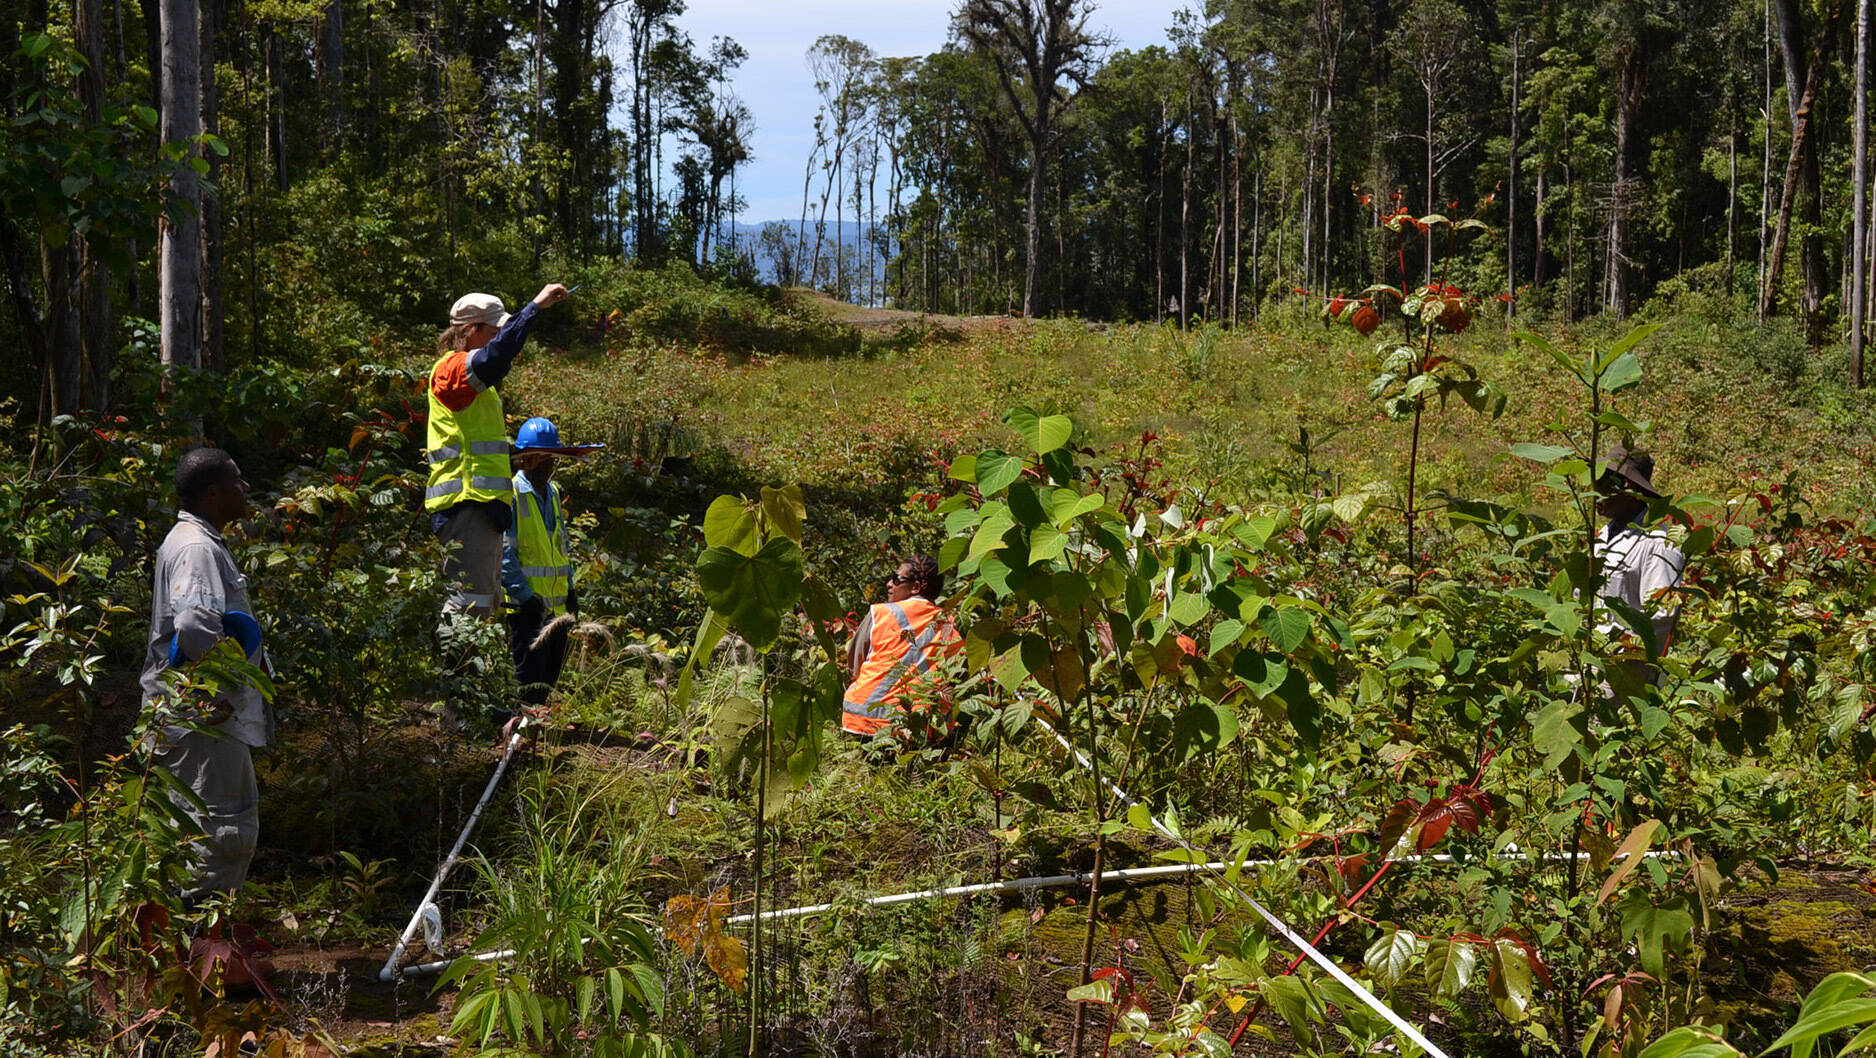 Post-project monitoring indicated that the ecological health of impacted habitats had improved since construction of the PNG LNG facilities was completed. Biodiversity survey results in designated biodiversity assessment areas exhibited high biodiversity values, including the discovery of entirely new species of plants and frogs.